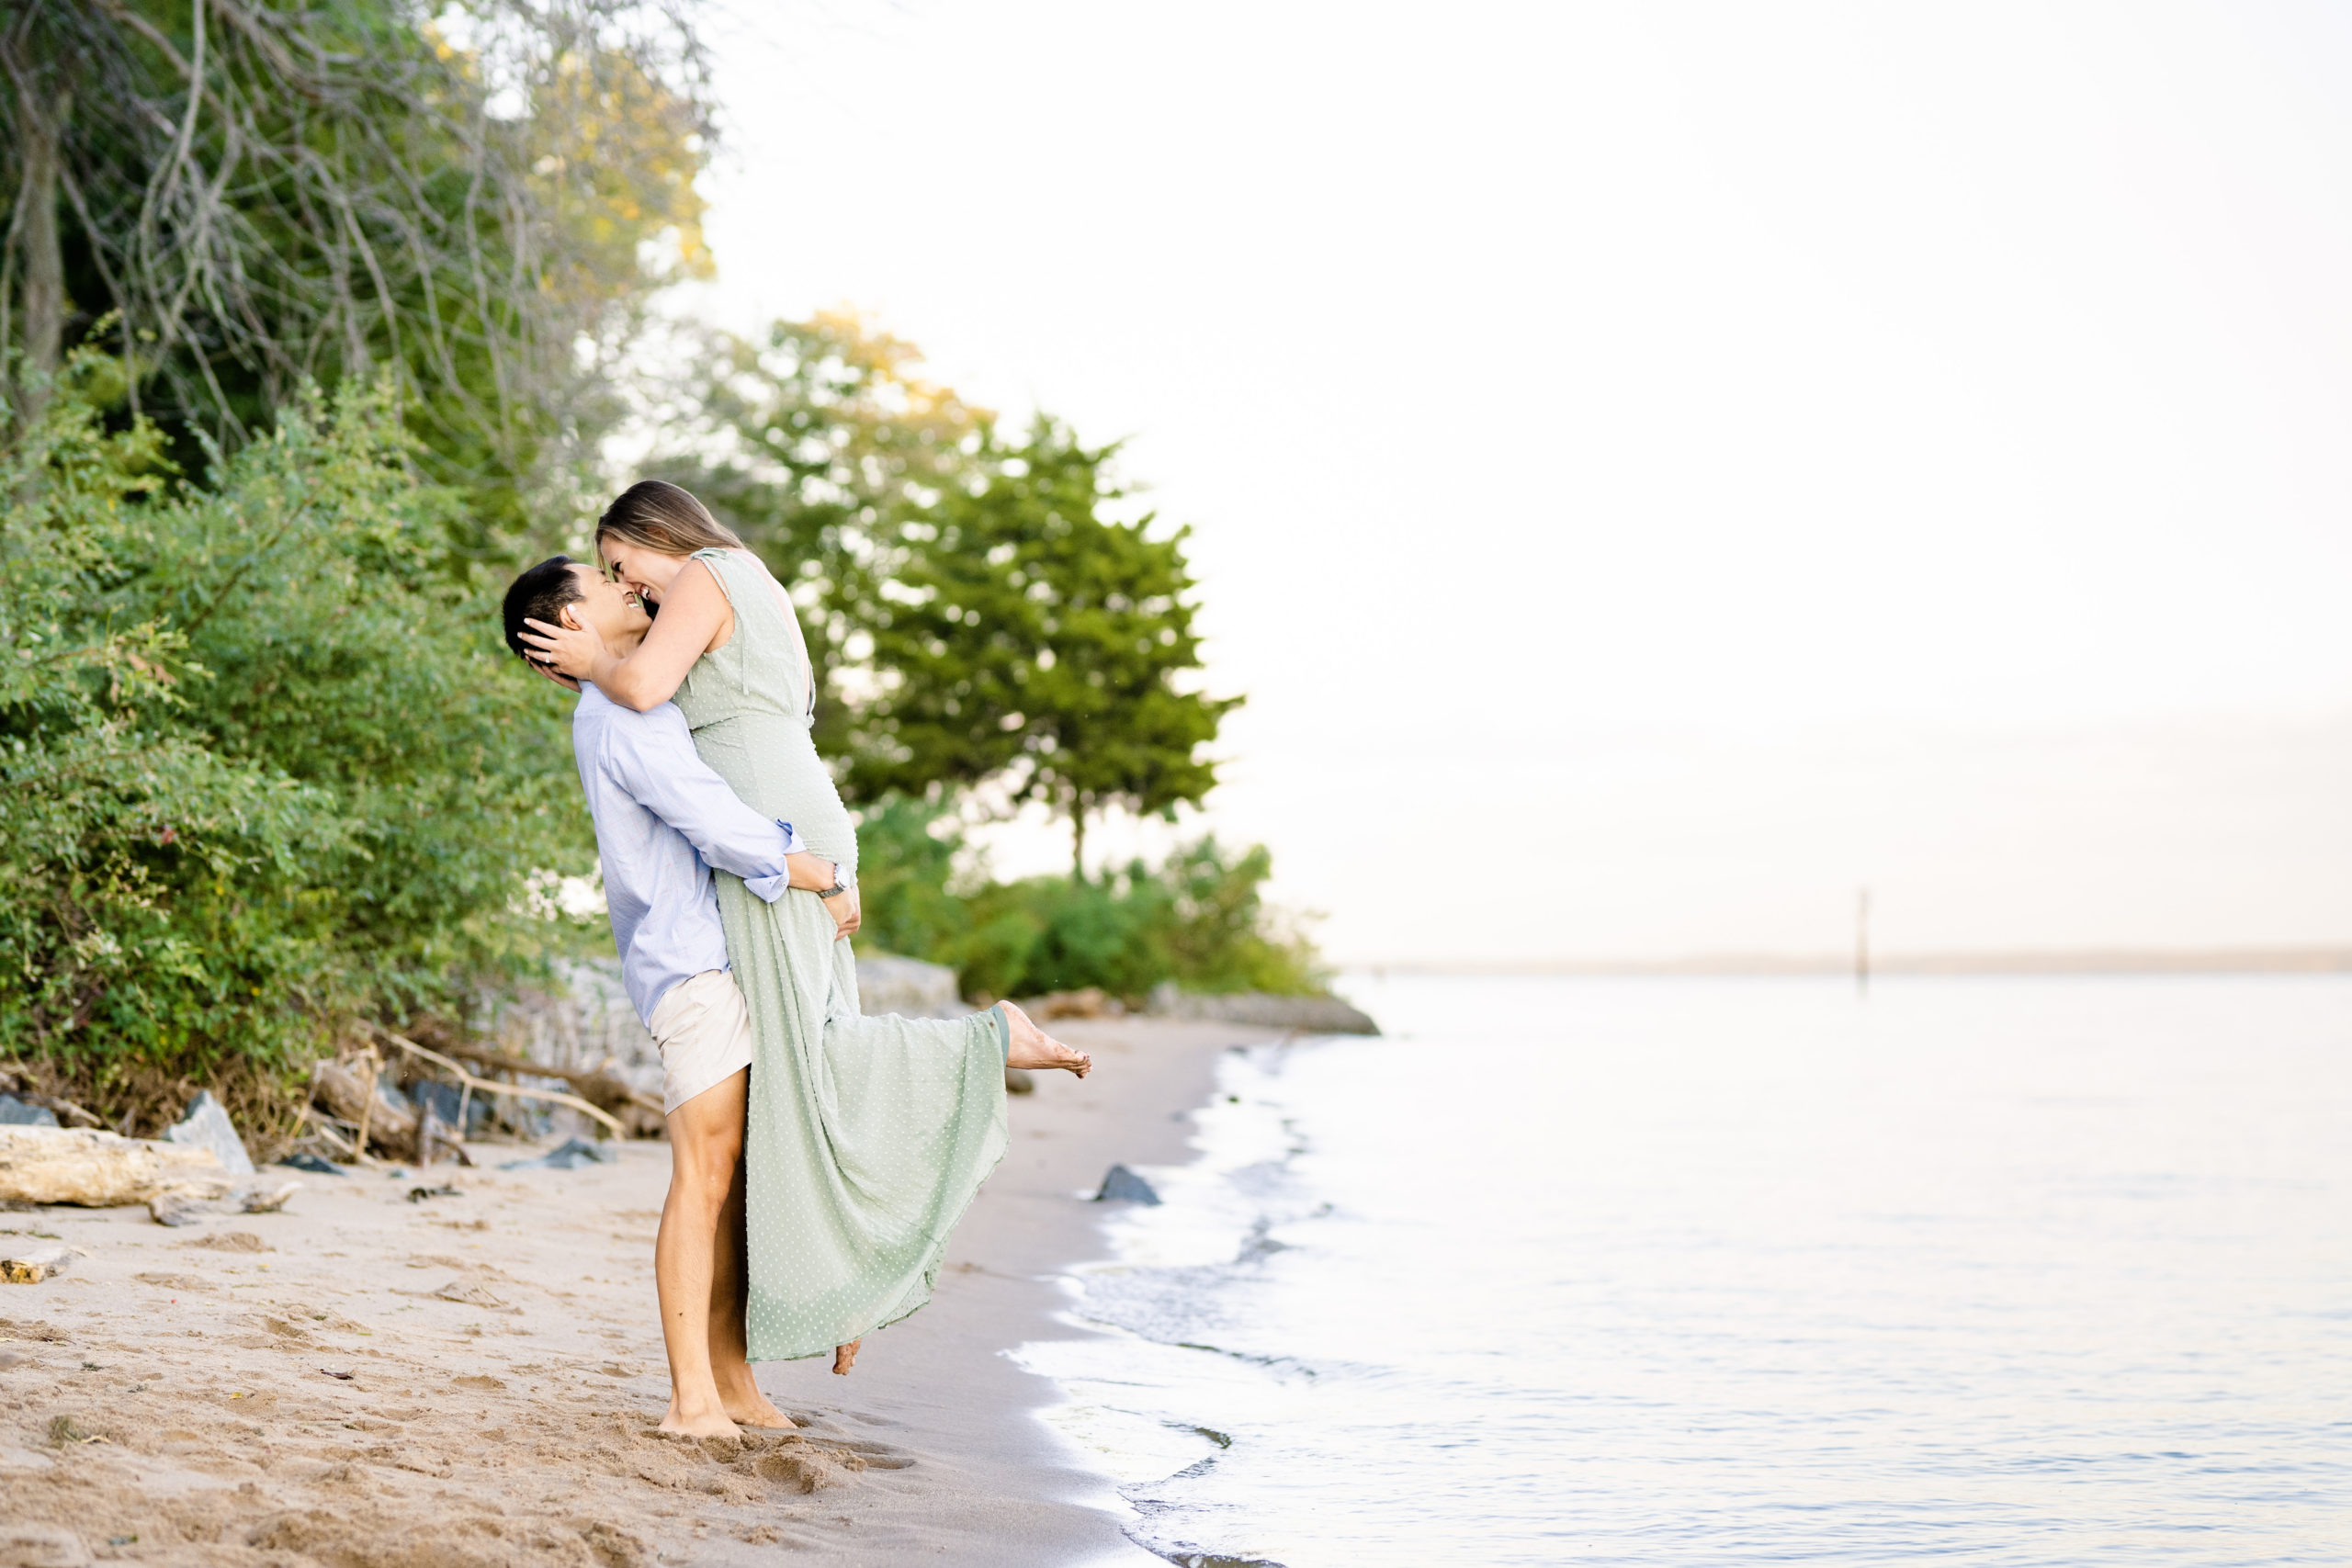 guy in tan shorts and blue shirt lifting girl in mint green dress while they laugh and kiss on the beach